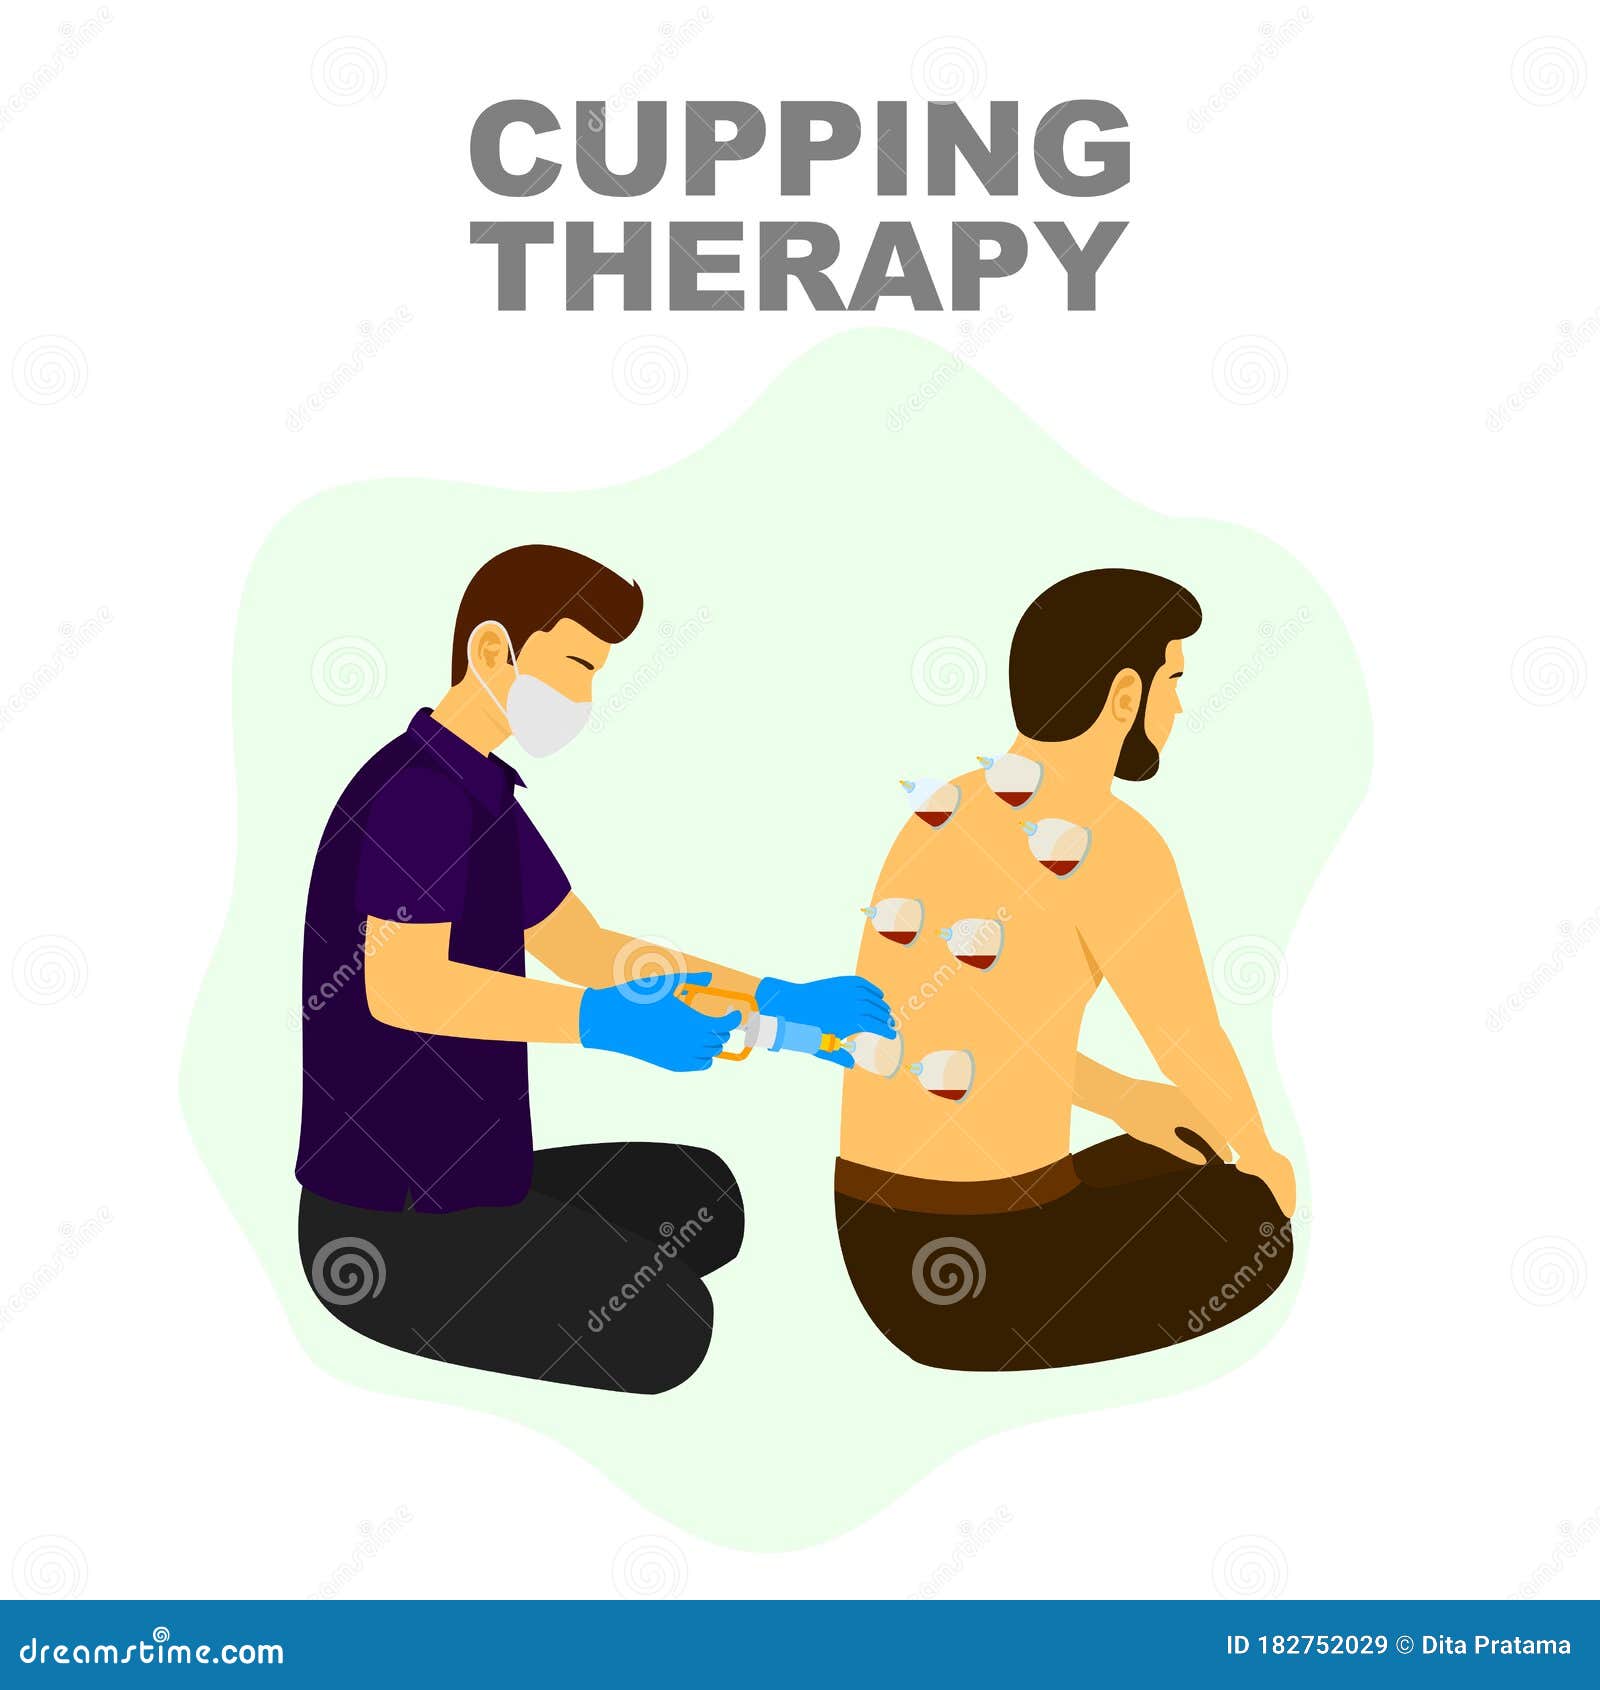 cupping therapy alternative medicine treatment, therapist puts a cup on skin .